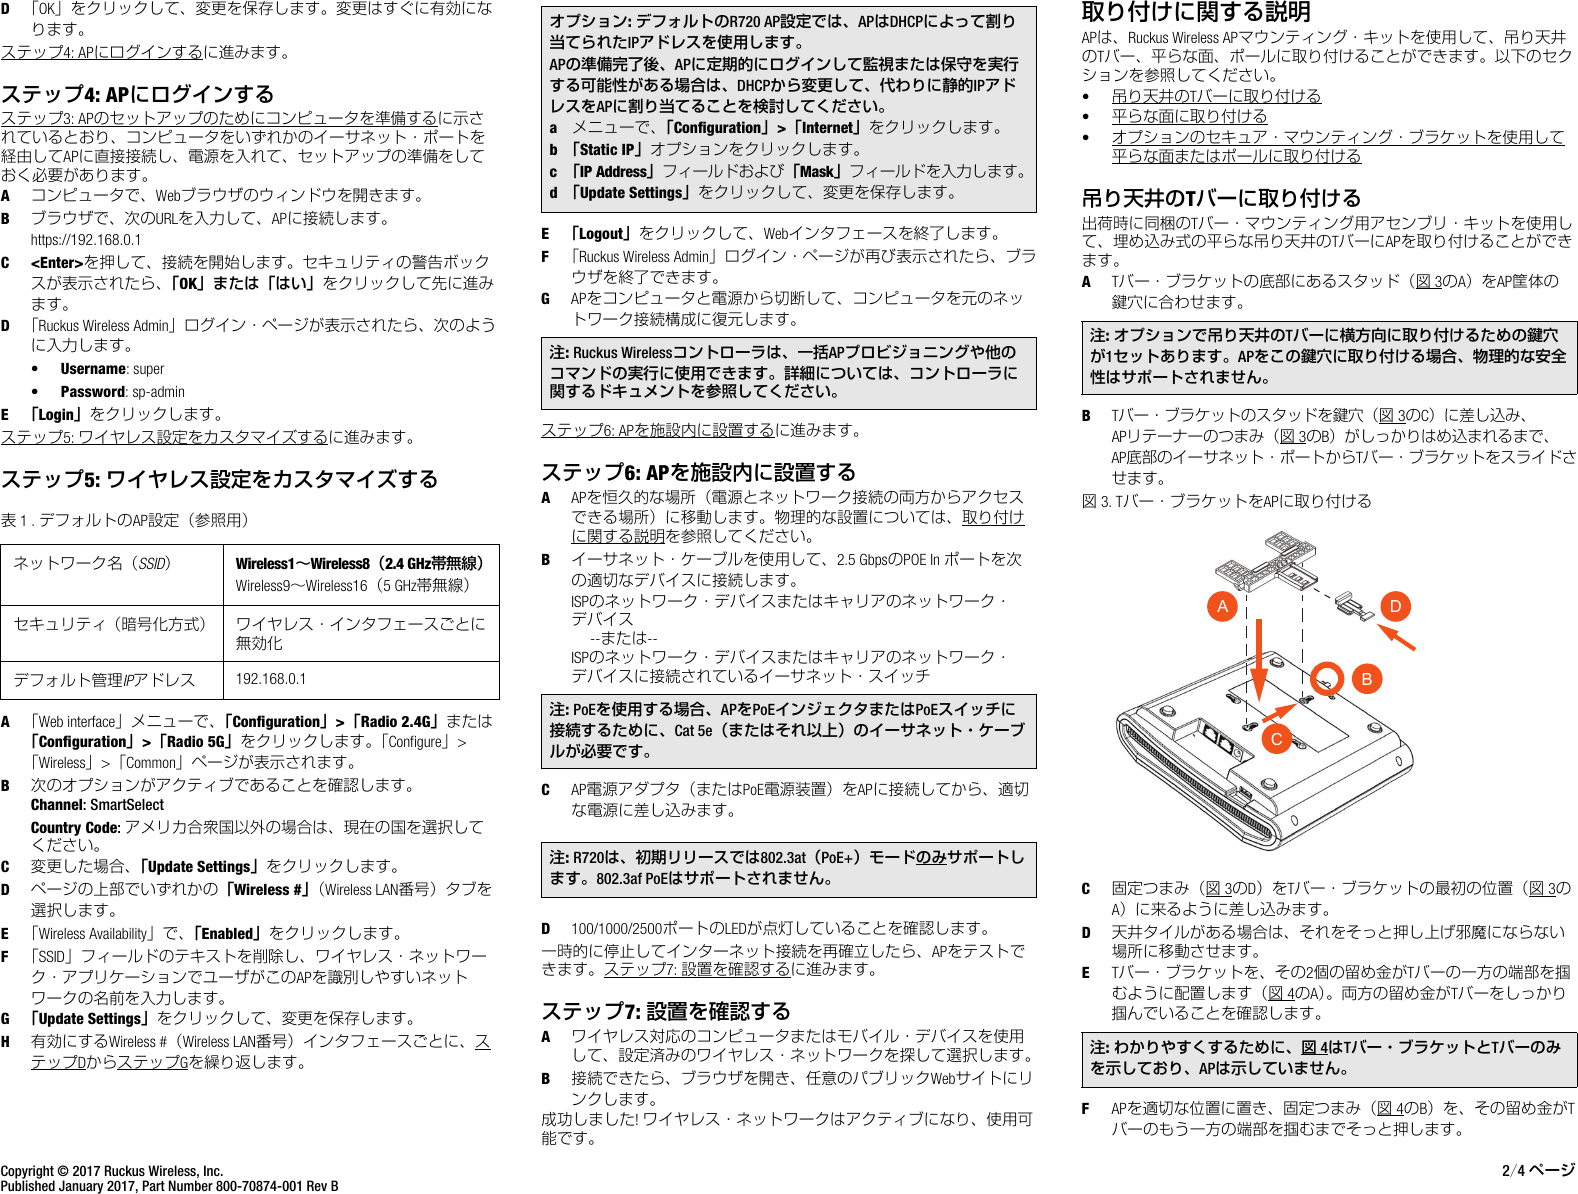 Page 2 of 4 - Ruckus R720 Access Point Quick Setup Guide Wireless Guide（Japanese Version, 日本語） R720-qsg-800-70874-001-rev B JA2